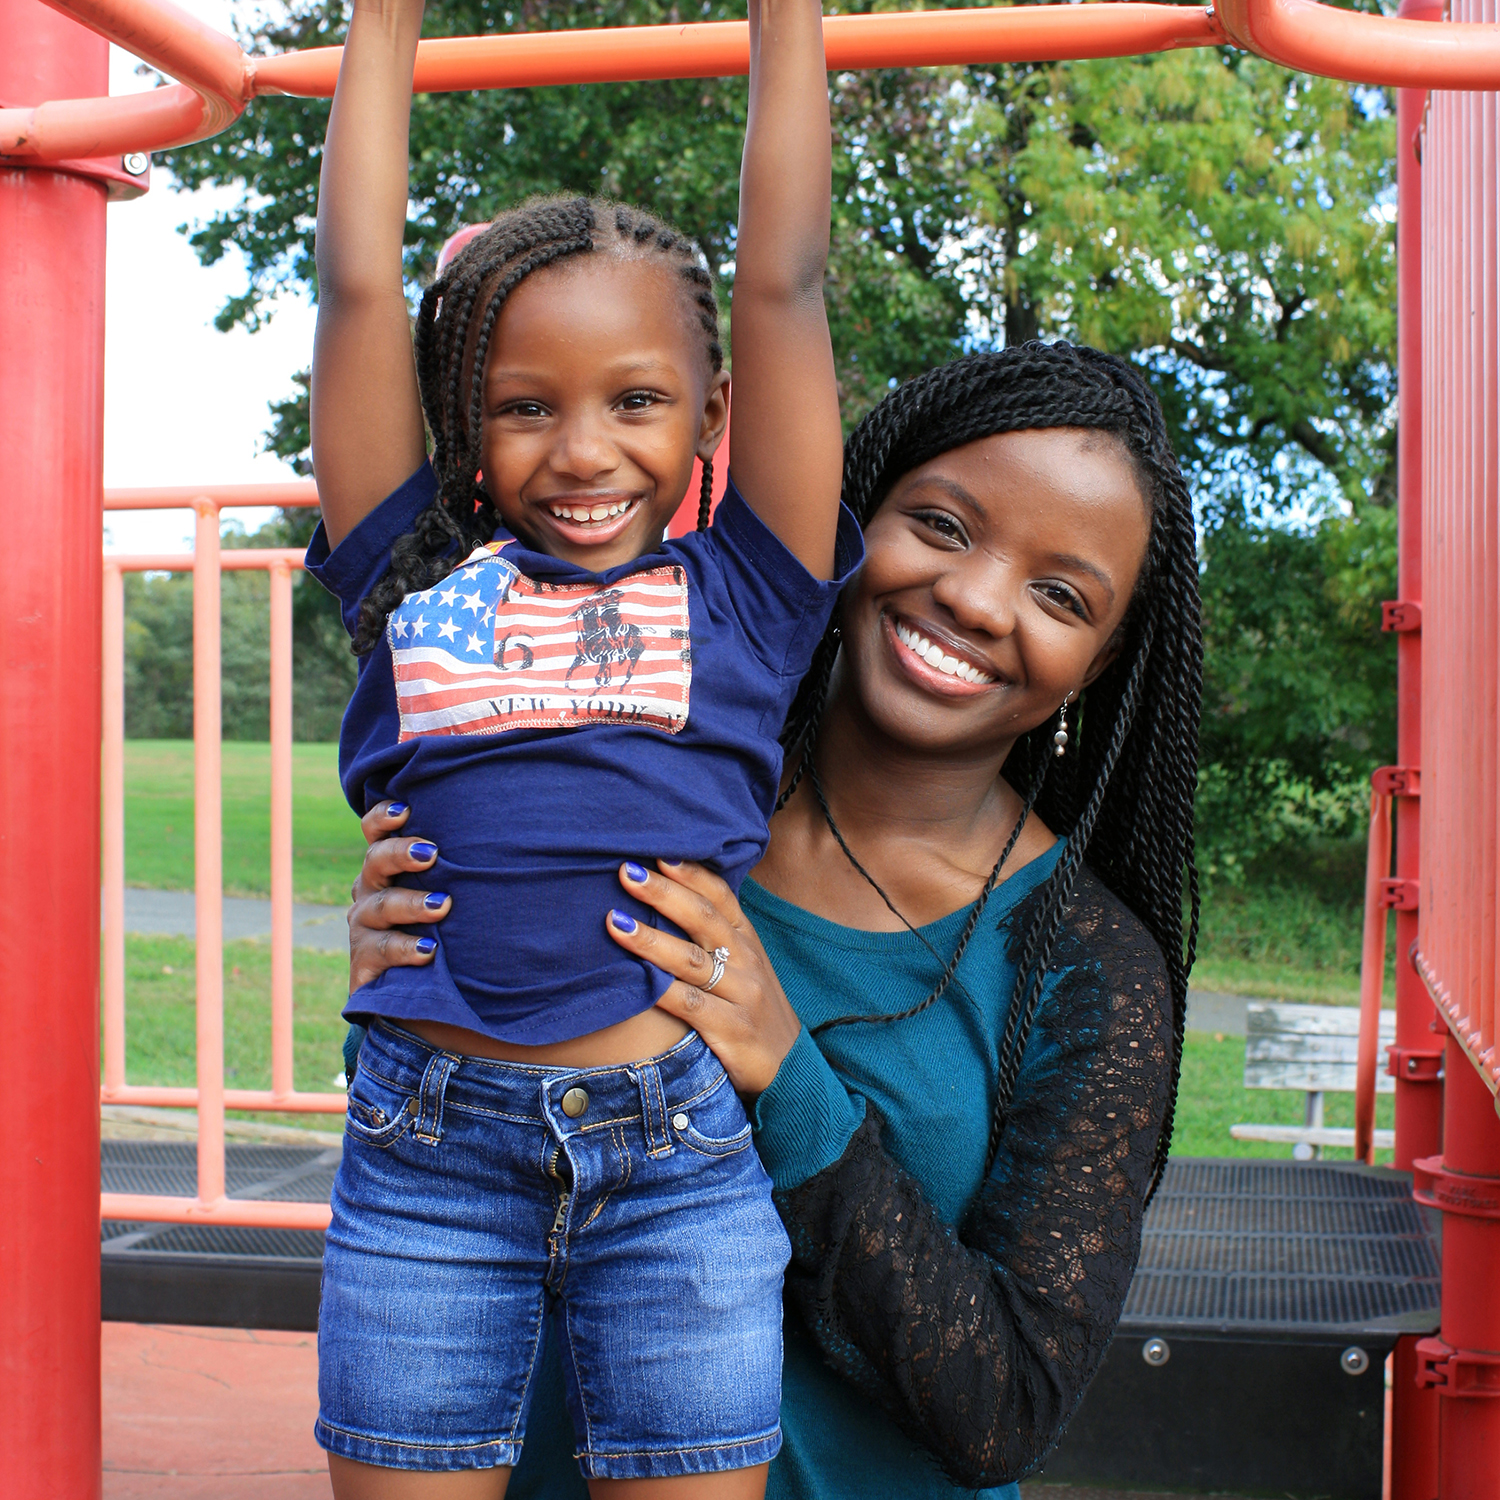 A woman holds a child on a play structure outside